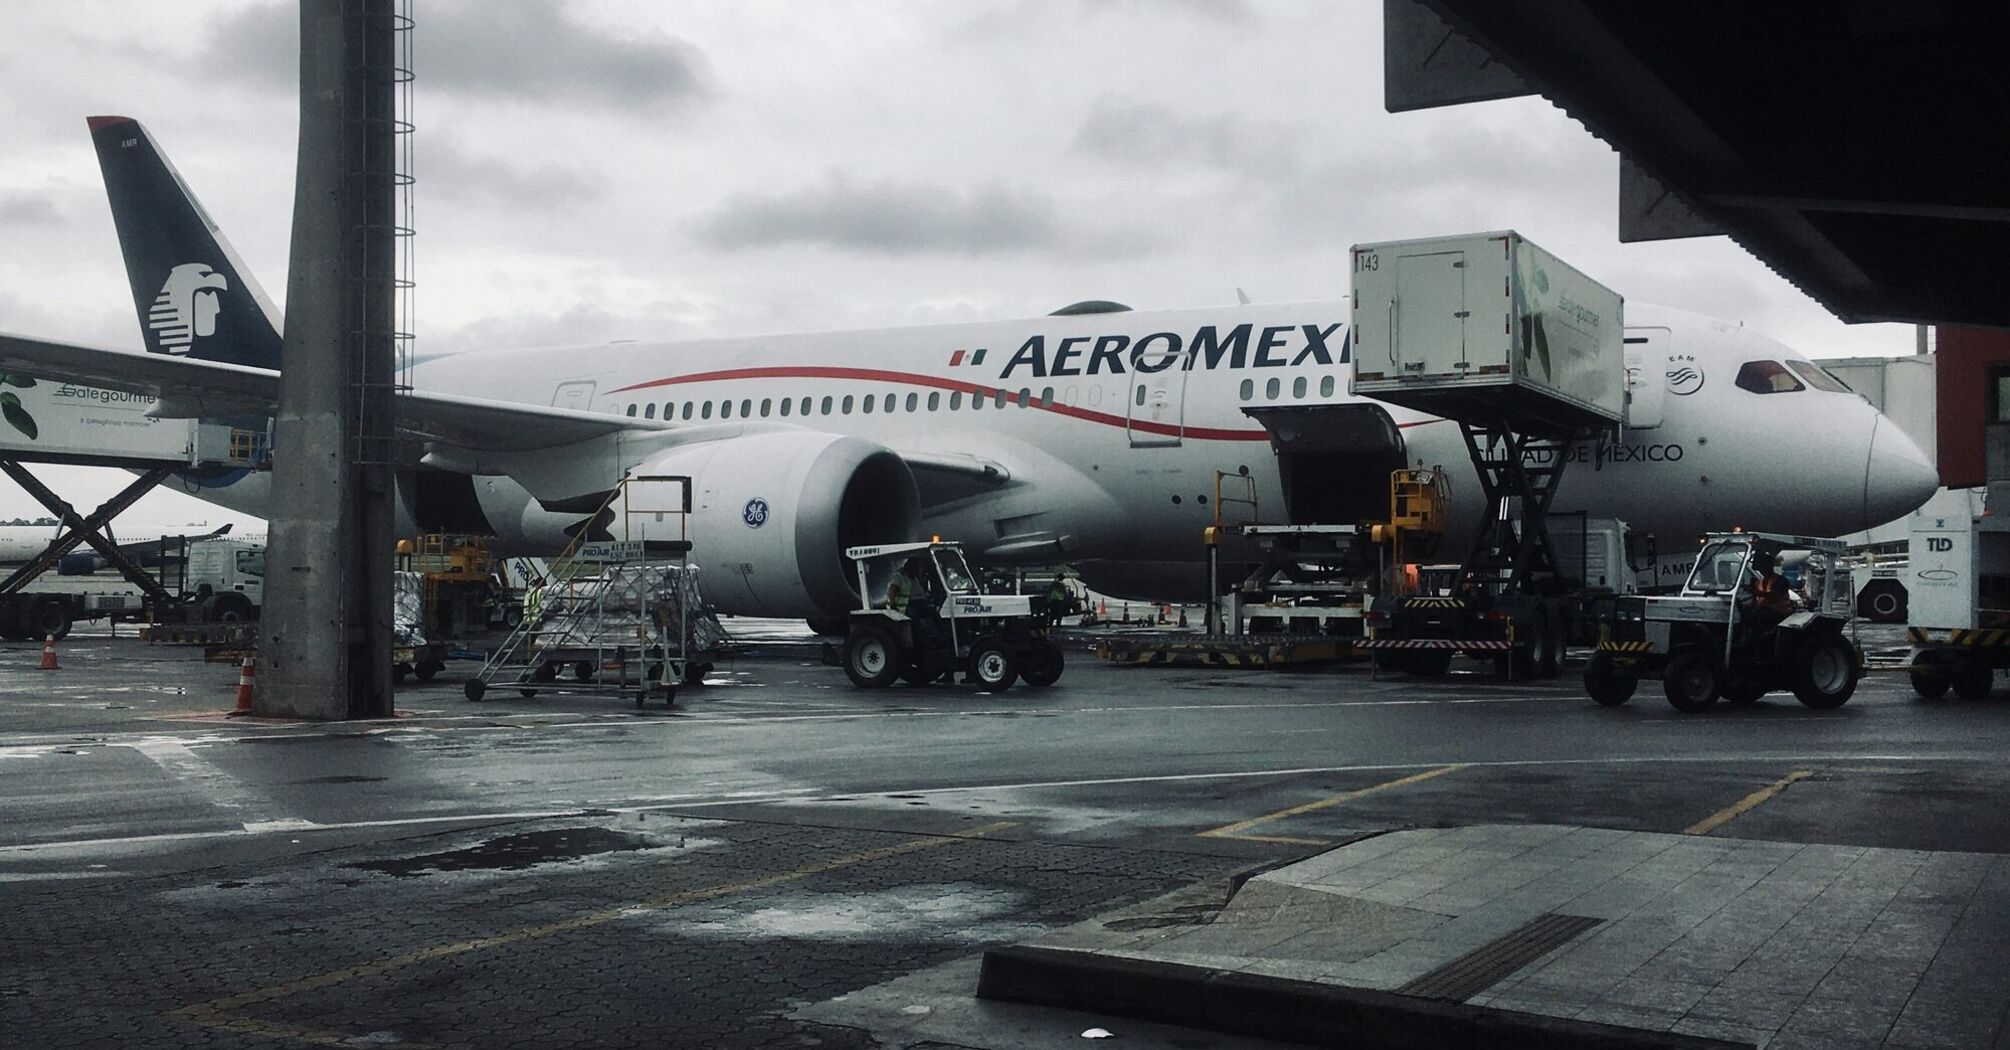 a large Aeromexico airplane is parked at an airport